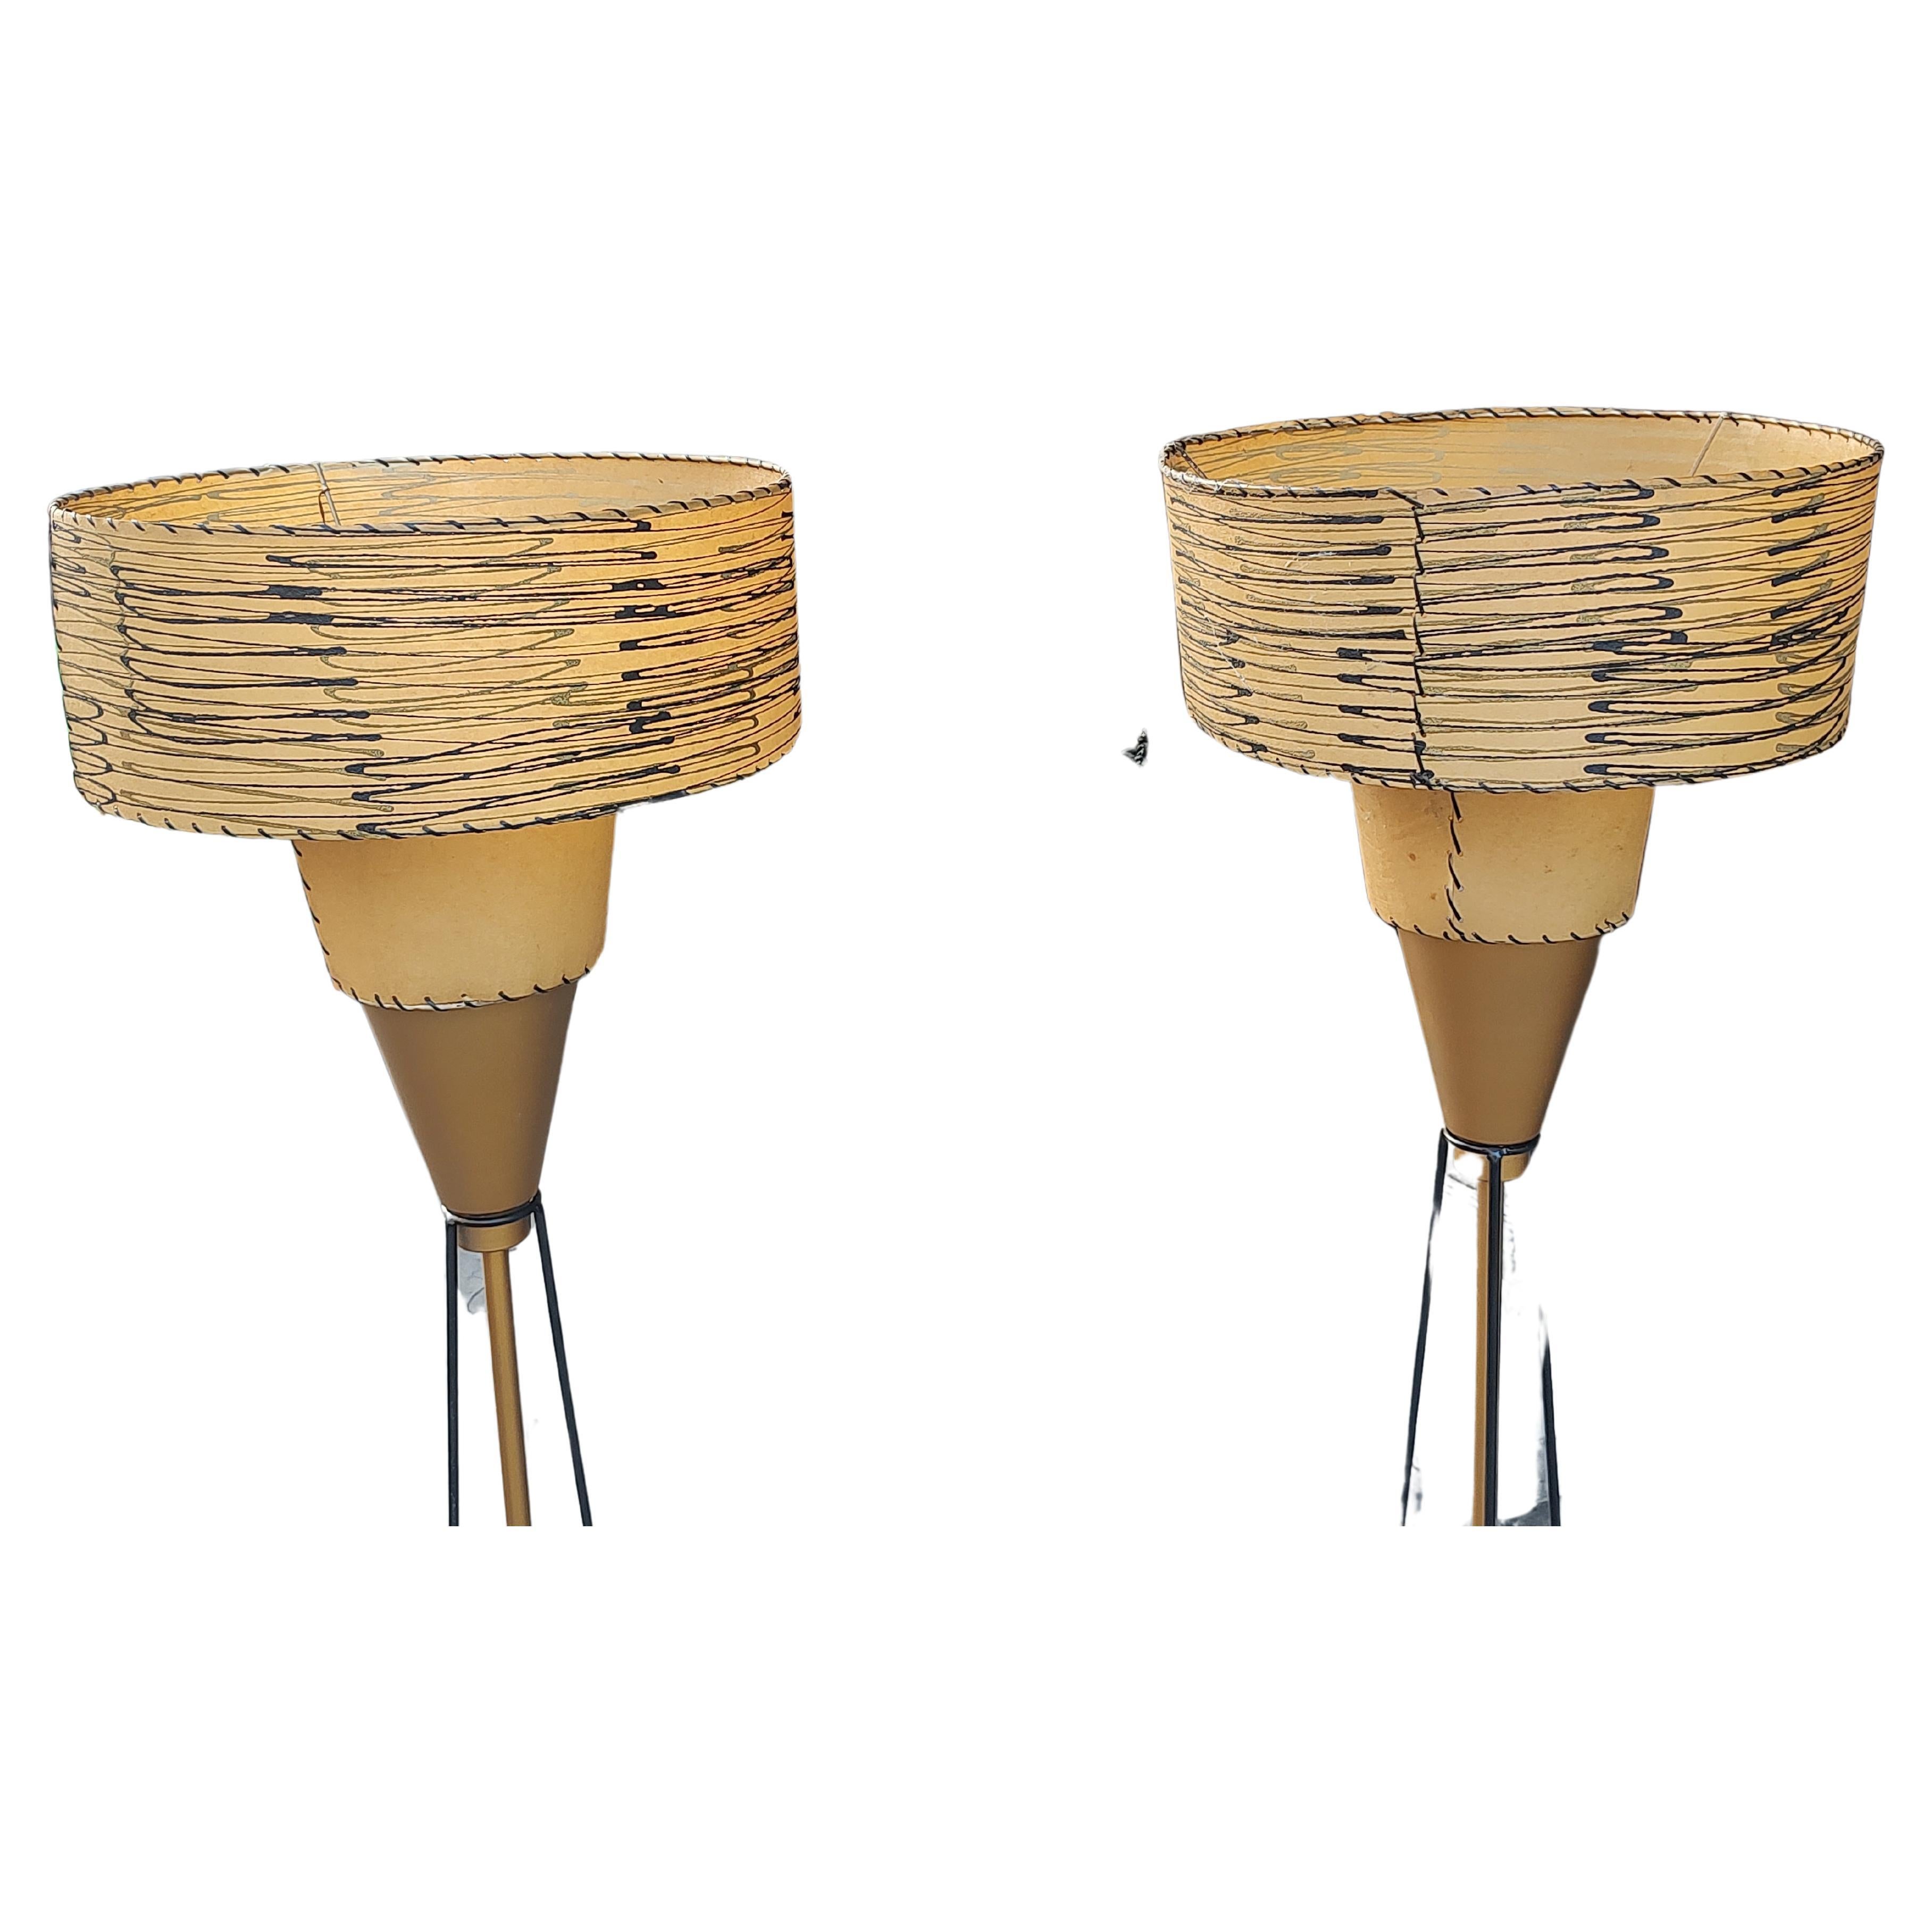 Fabulous and rare pair of Mid Century Modern Sculptural floor lamps attributed to the Majestic Lamp Co.  All original parts with restored bases (painted, rewired). Shades are totally intact and original in all manners.Double shades have a cradle